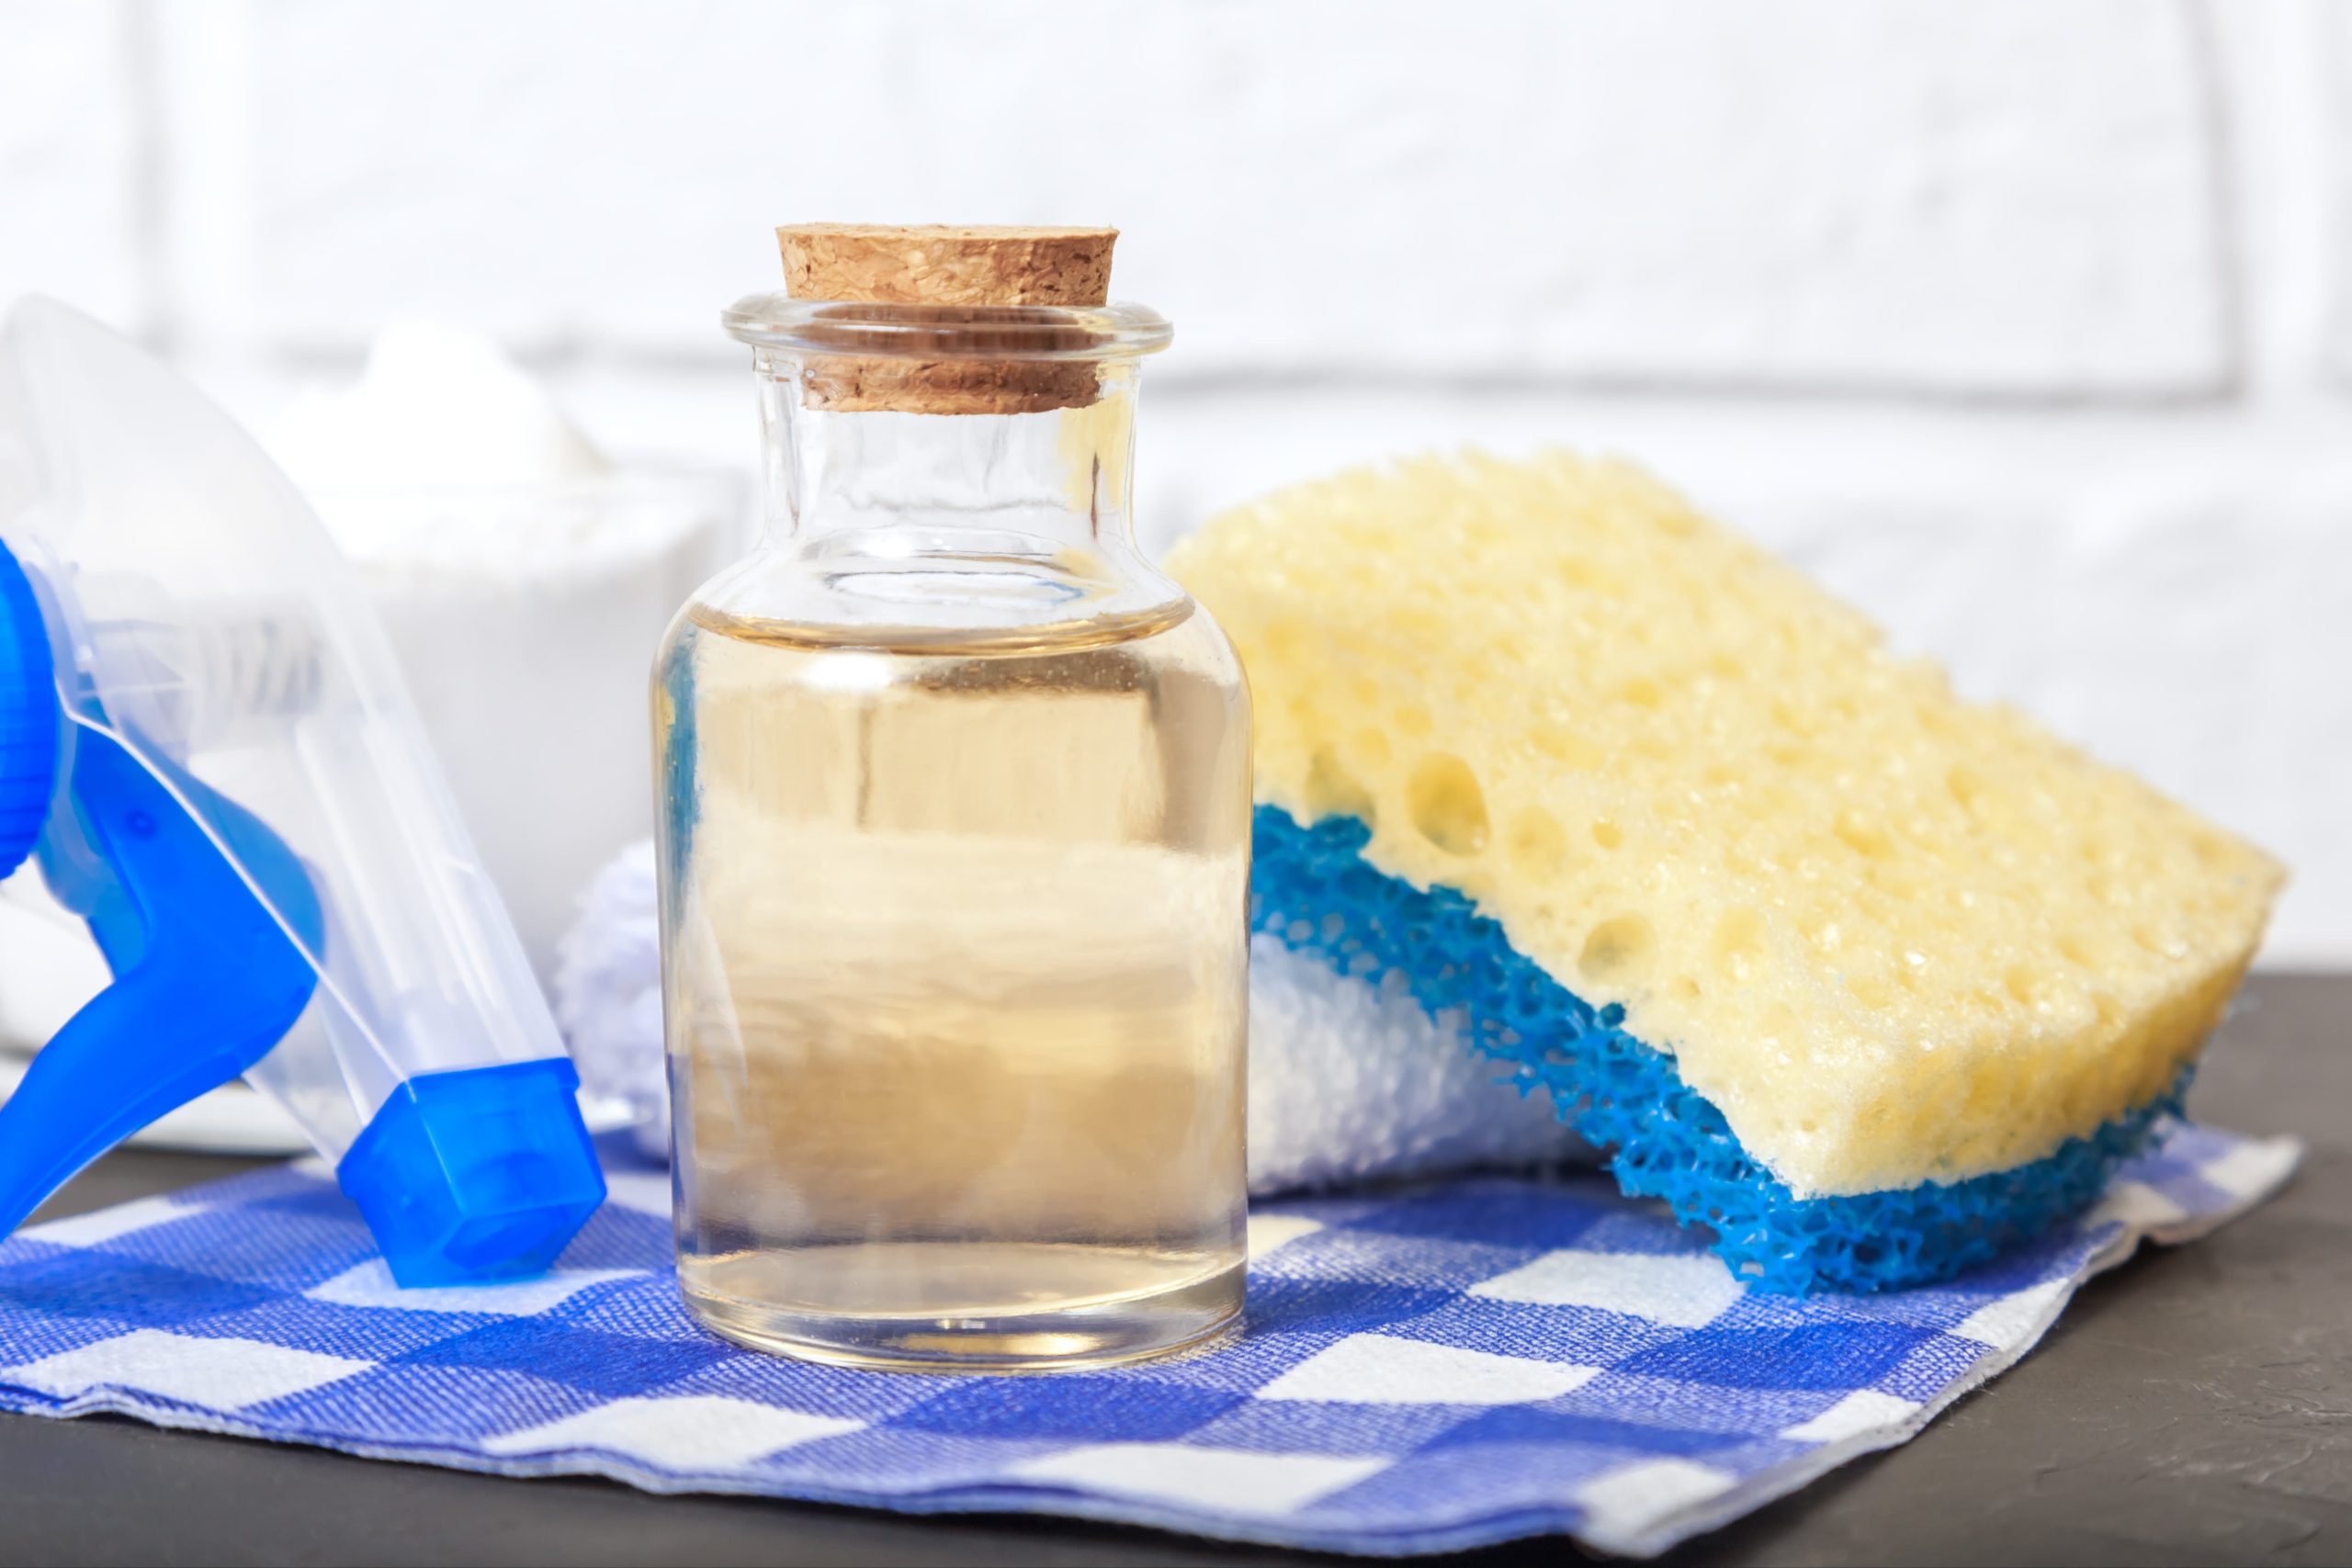 How to Use Vinegar for Natural Cleaning